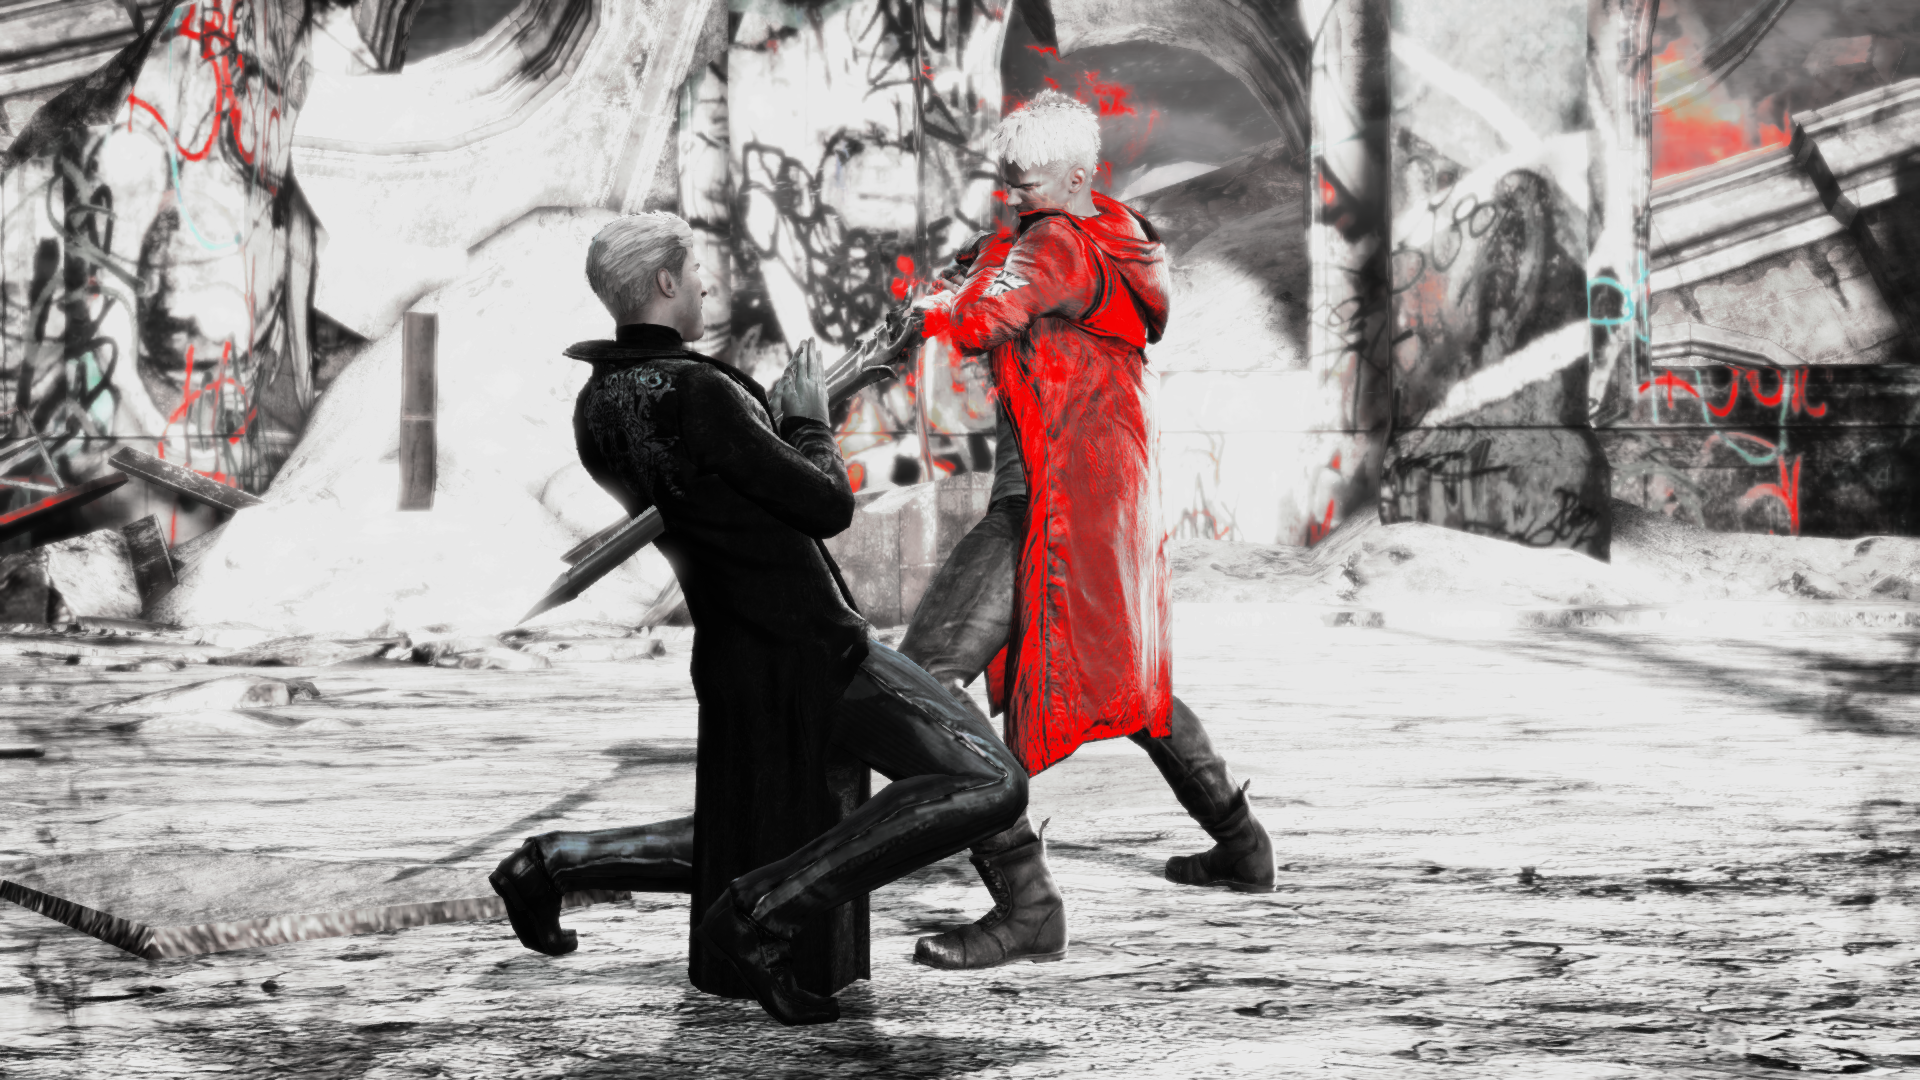 Why The Original Devil May Cry Doesn't Need a Remake 